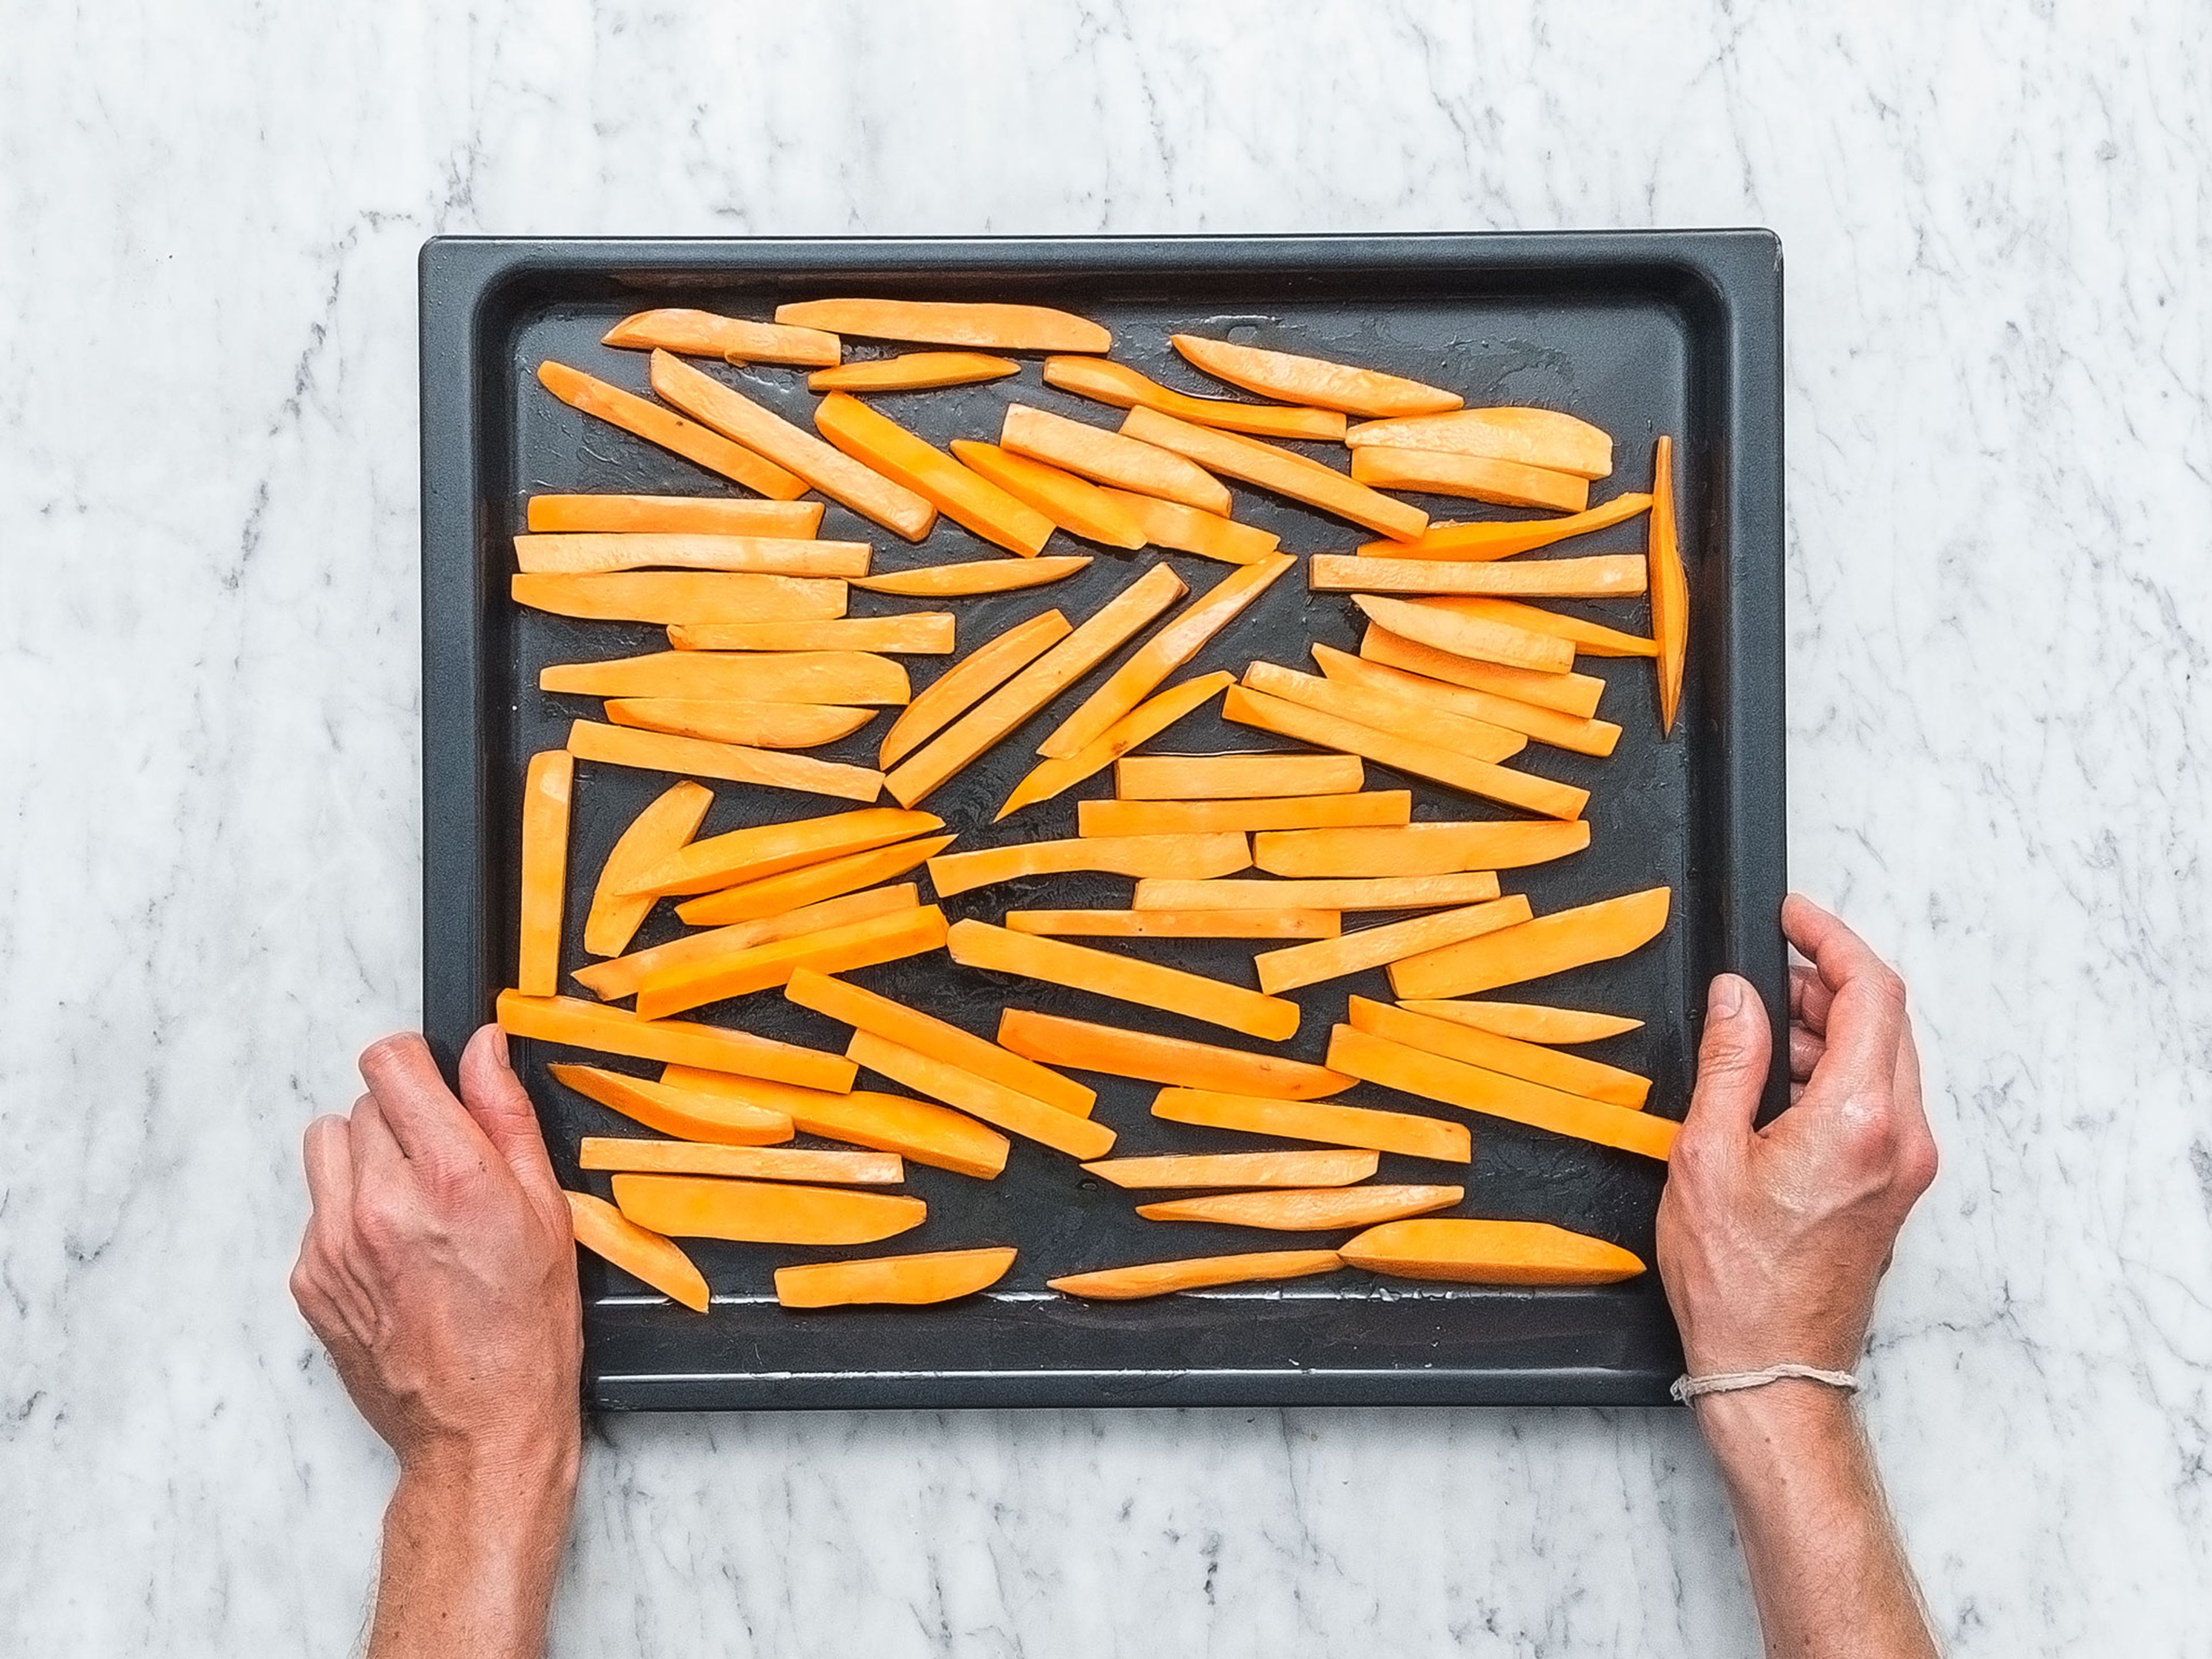 Pre-heat oven to 220°C/430°F. Cut sweet potatoes into matchsticks and transfer them to a large bowl. Add cornstarch and toss to coat. Spread sweet potato fries over a baking sheet. Add some oil and smoked ground paprika and toss to coat. Bake for approx. 20 min. or until golden-brown and crisp. Remove from oven and season with salt to taste.